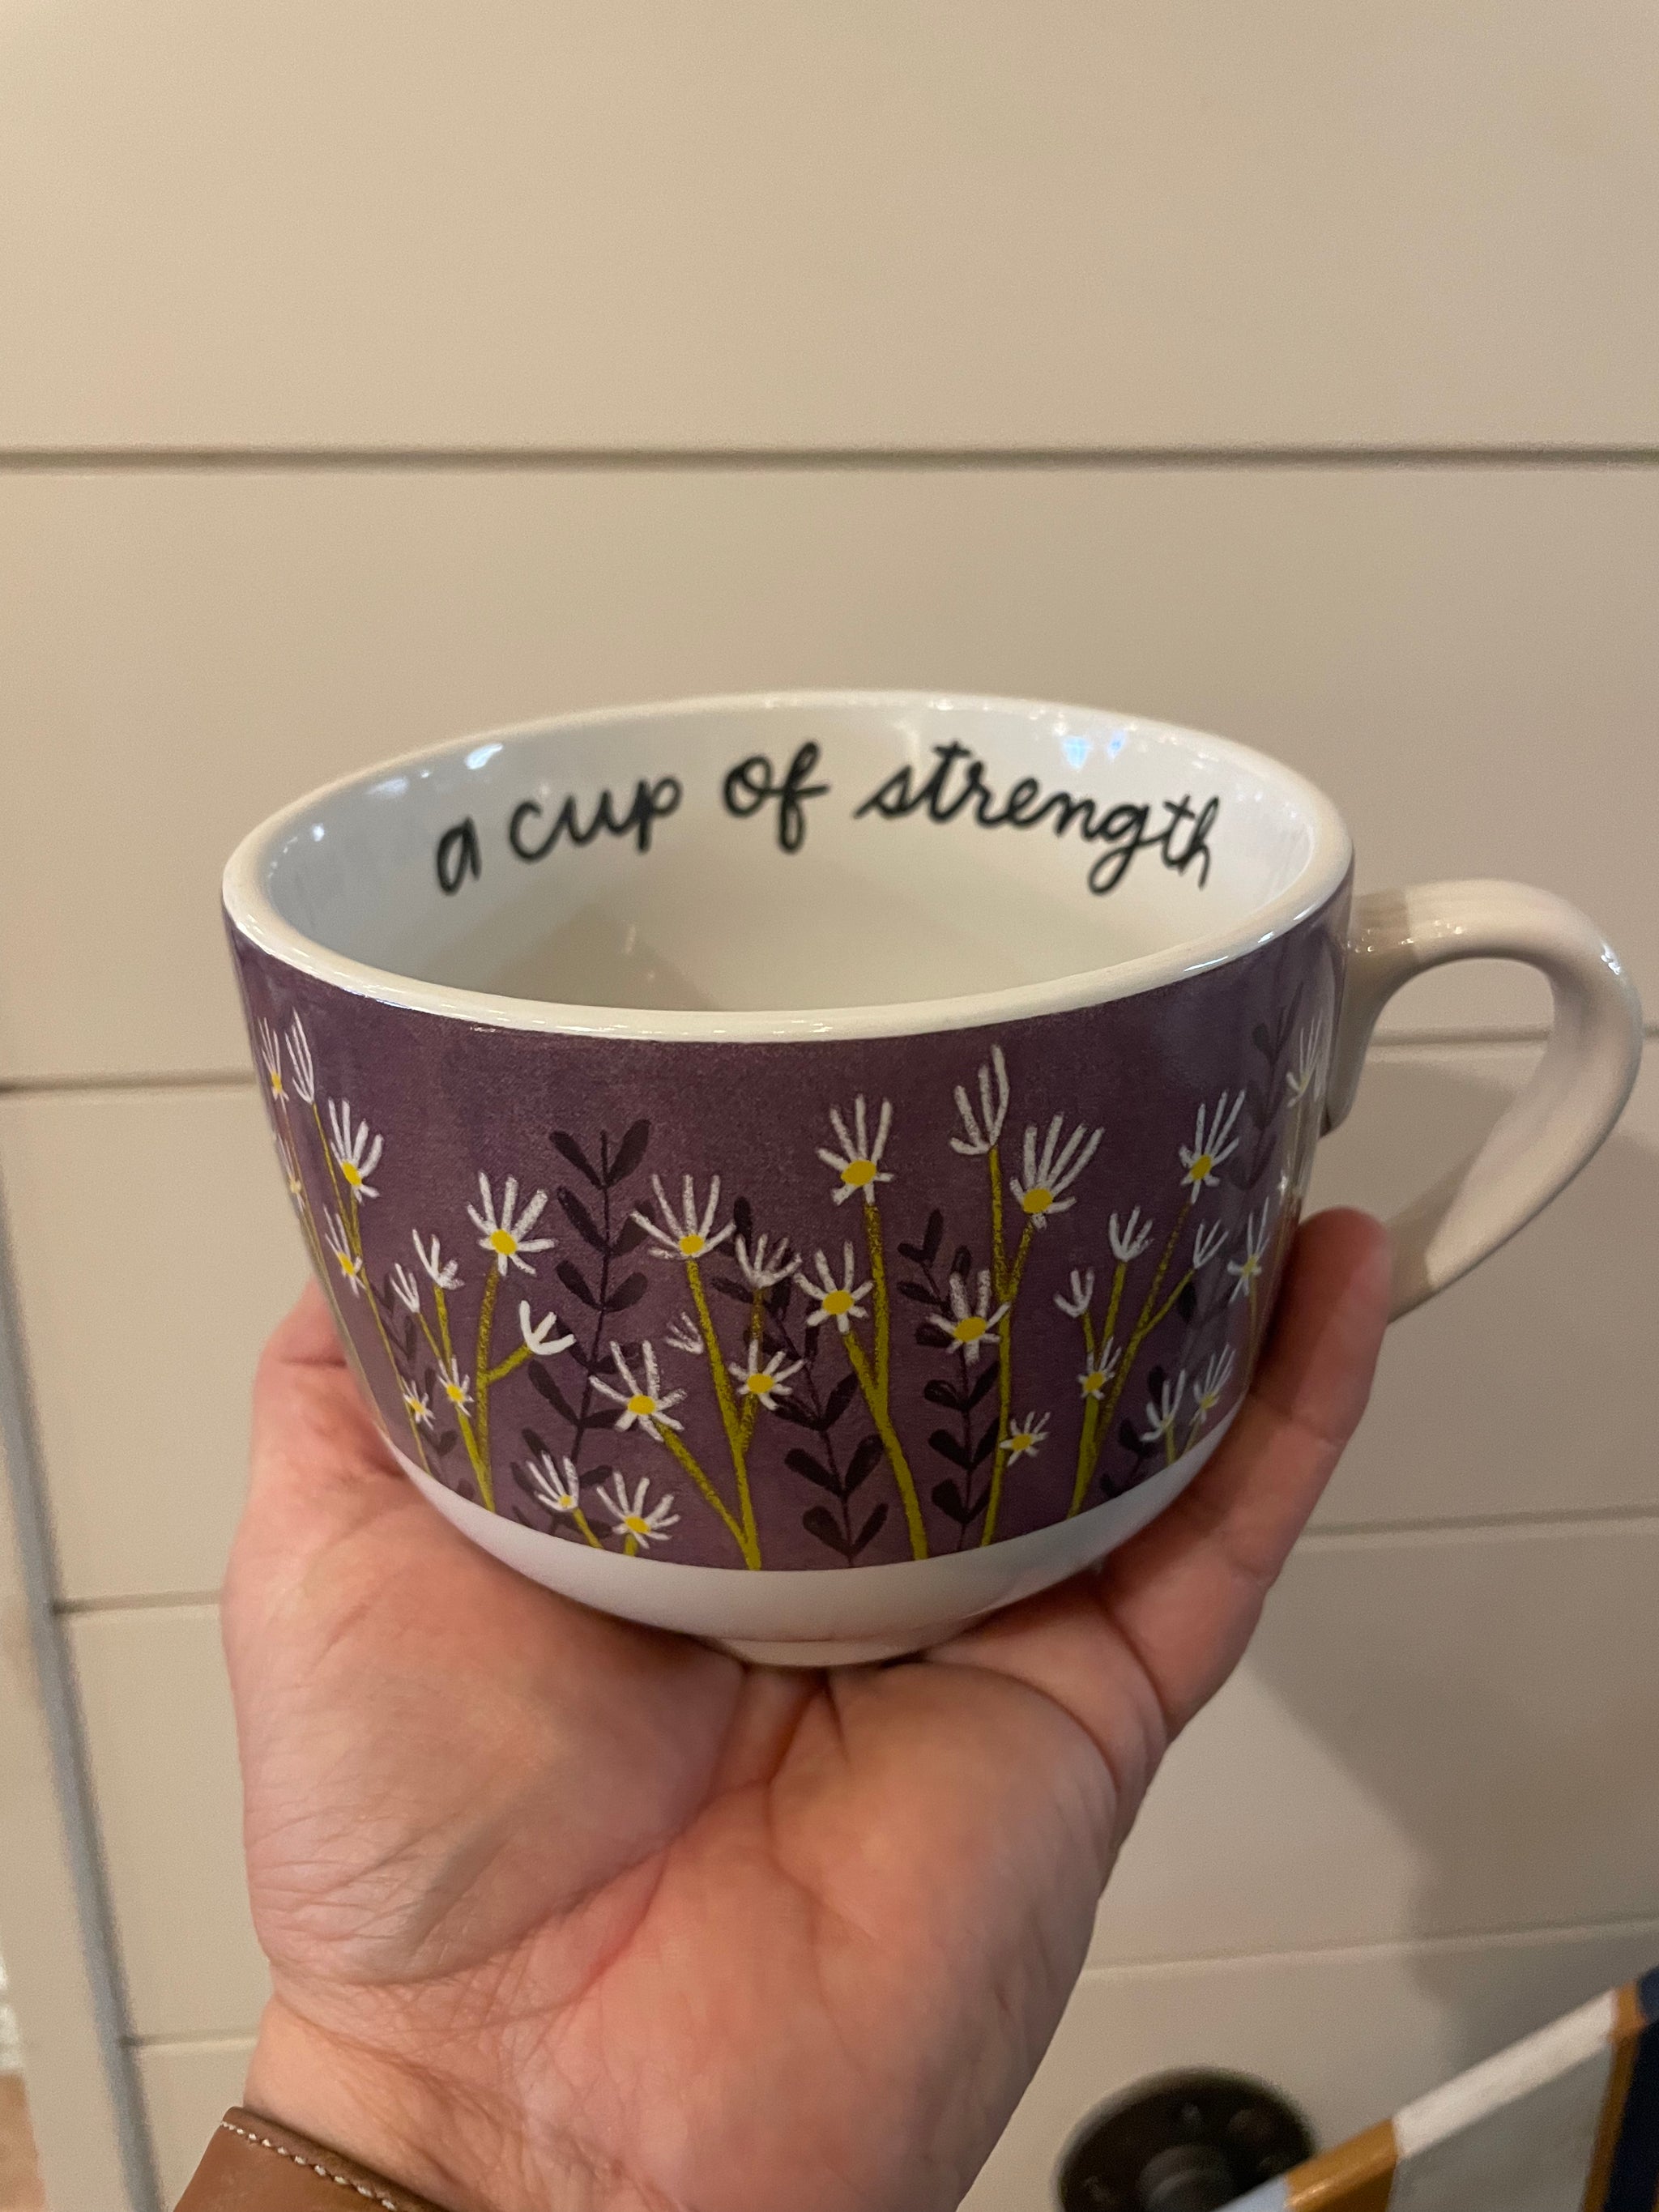 Cup of Strength